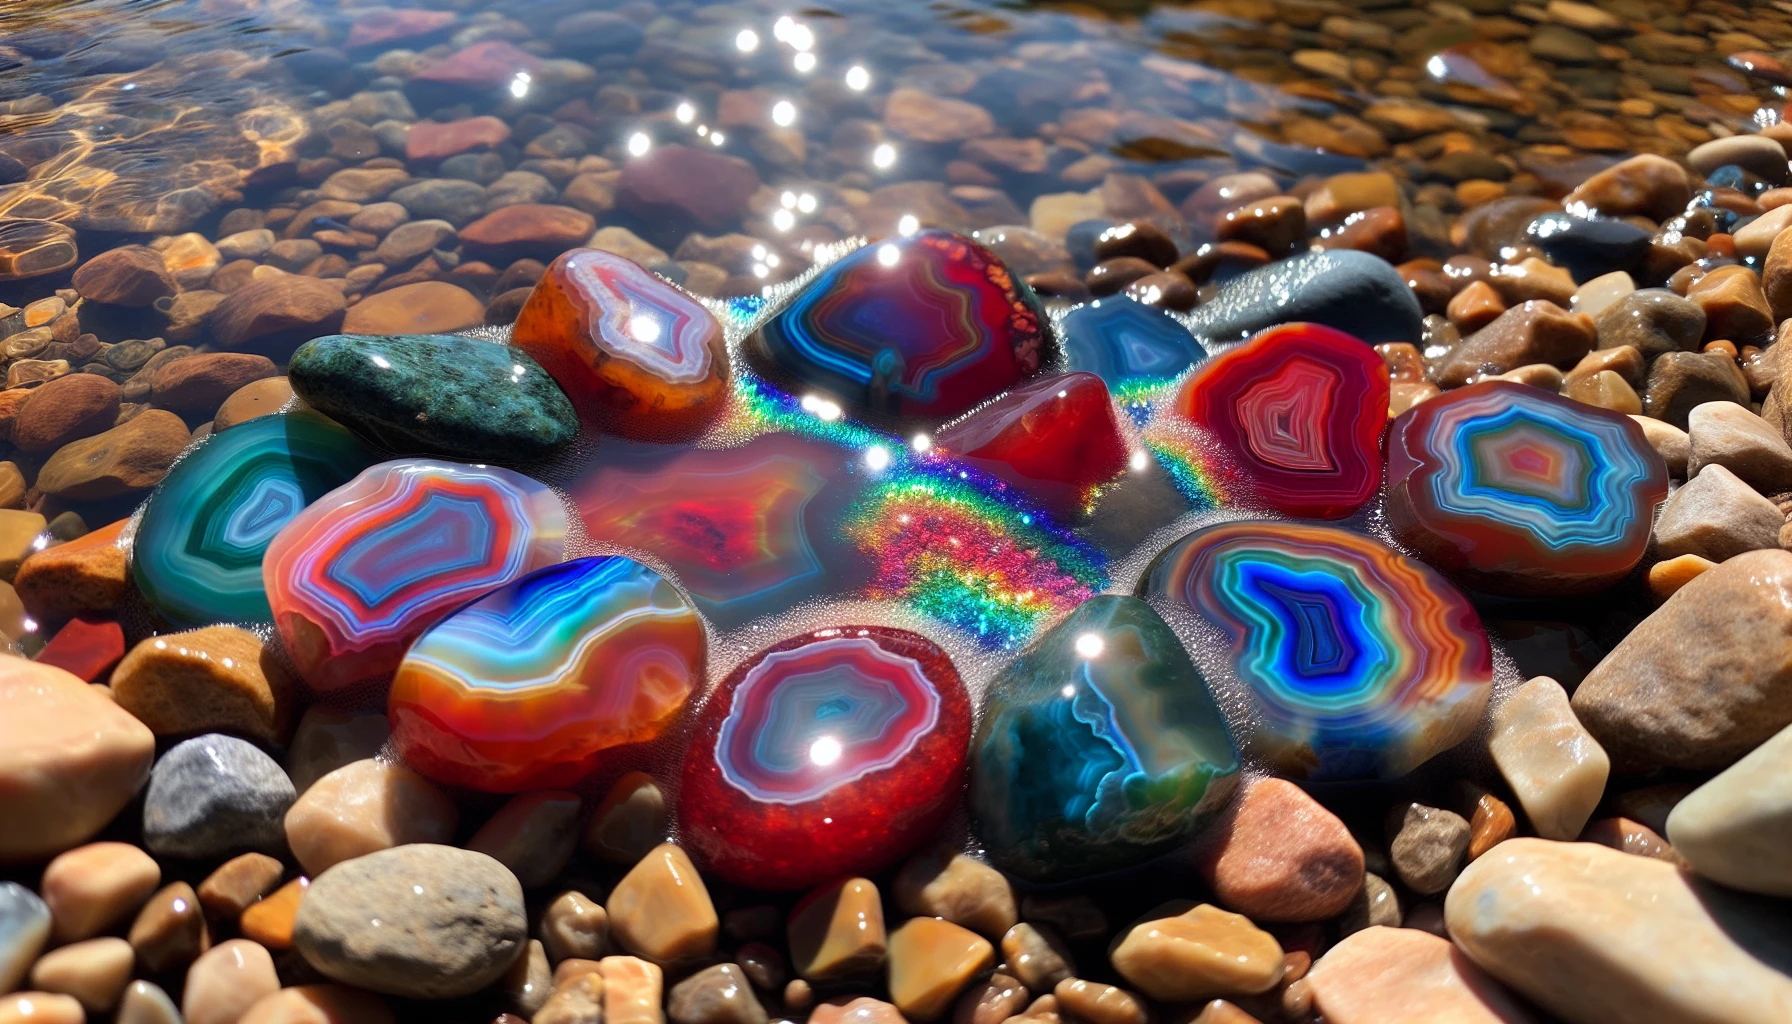 A collection of different types of agate stones placed near a water source